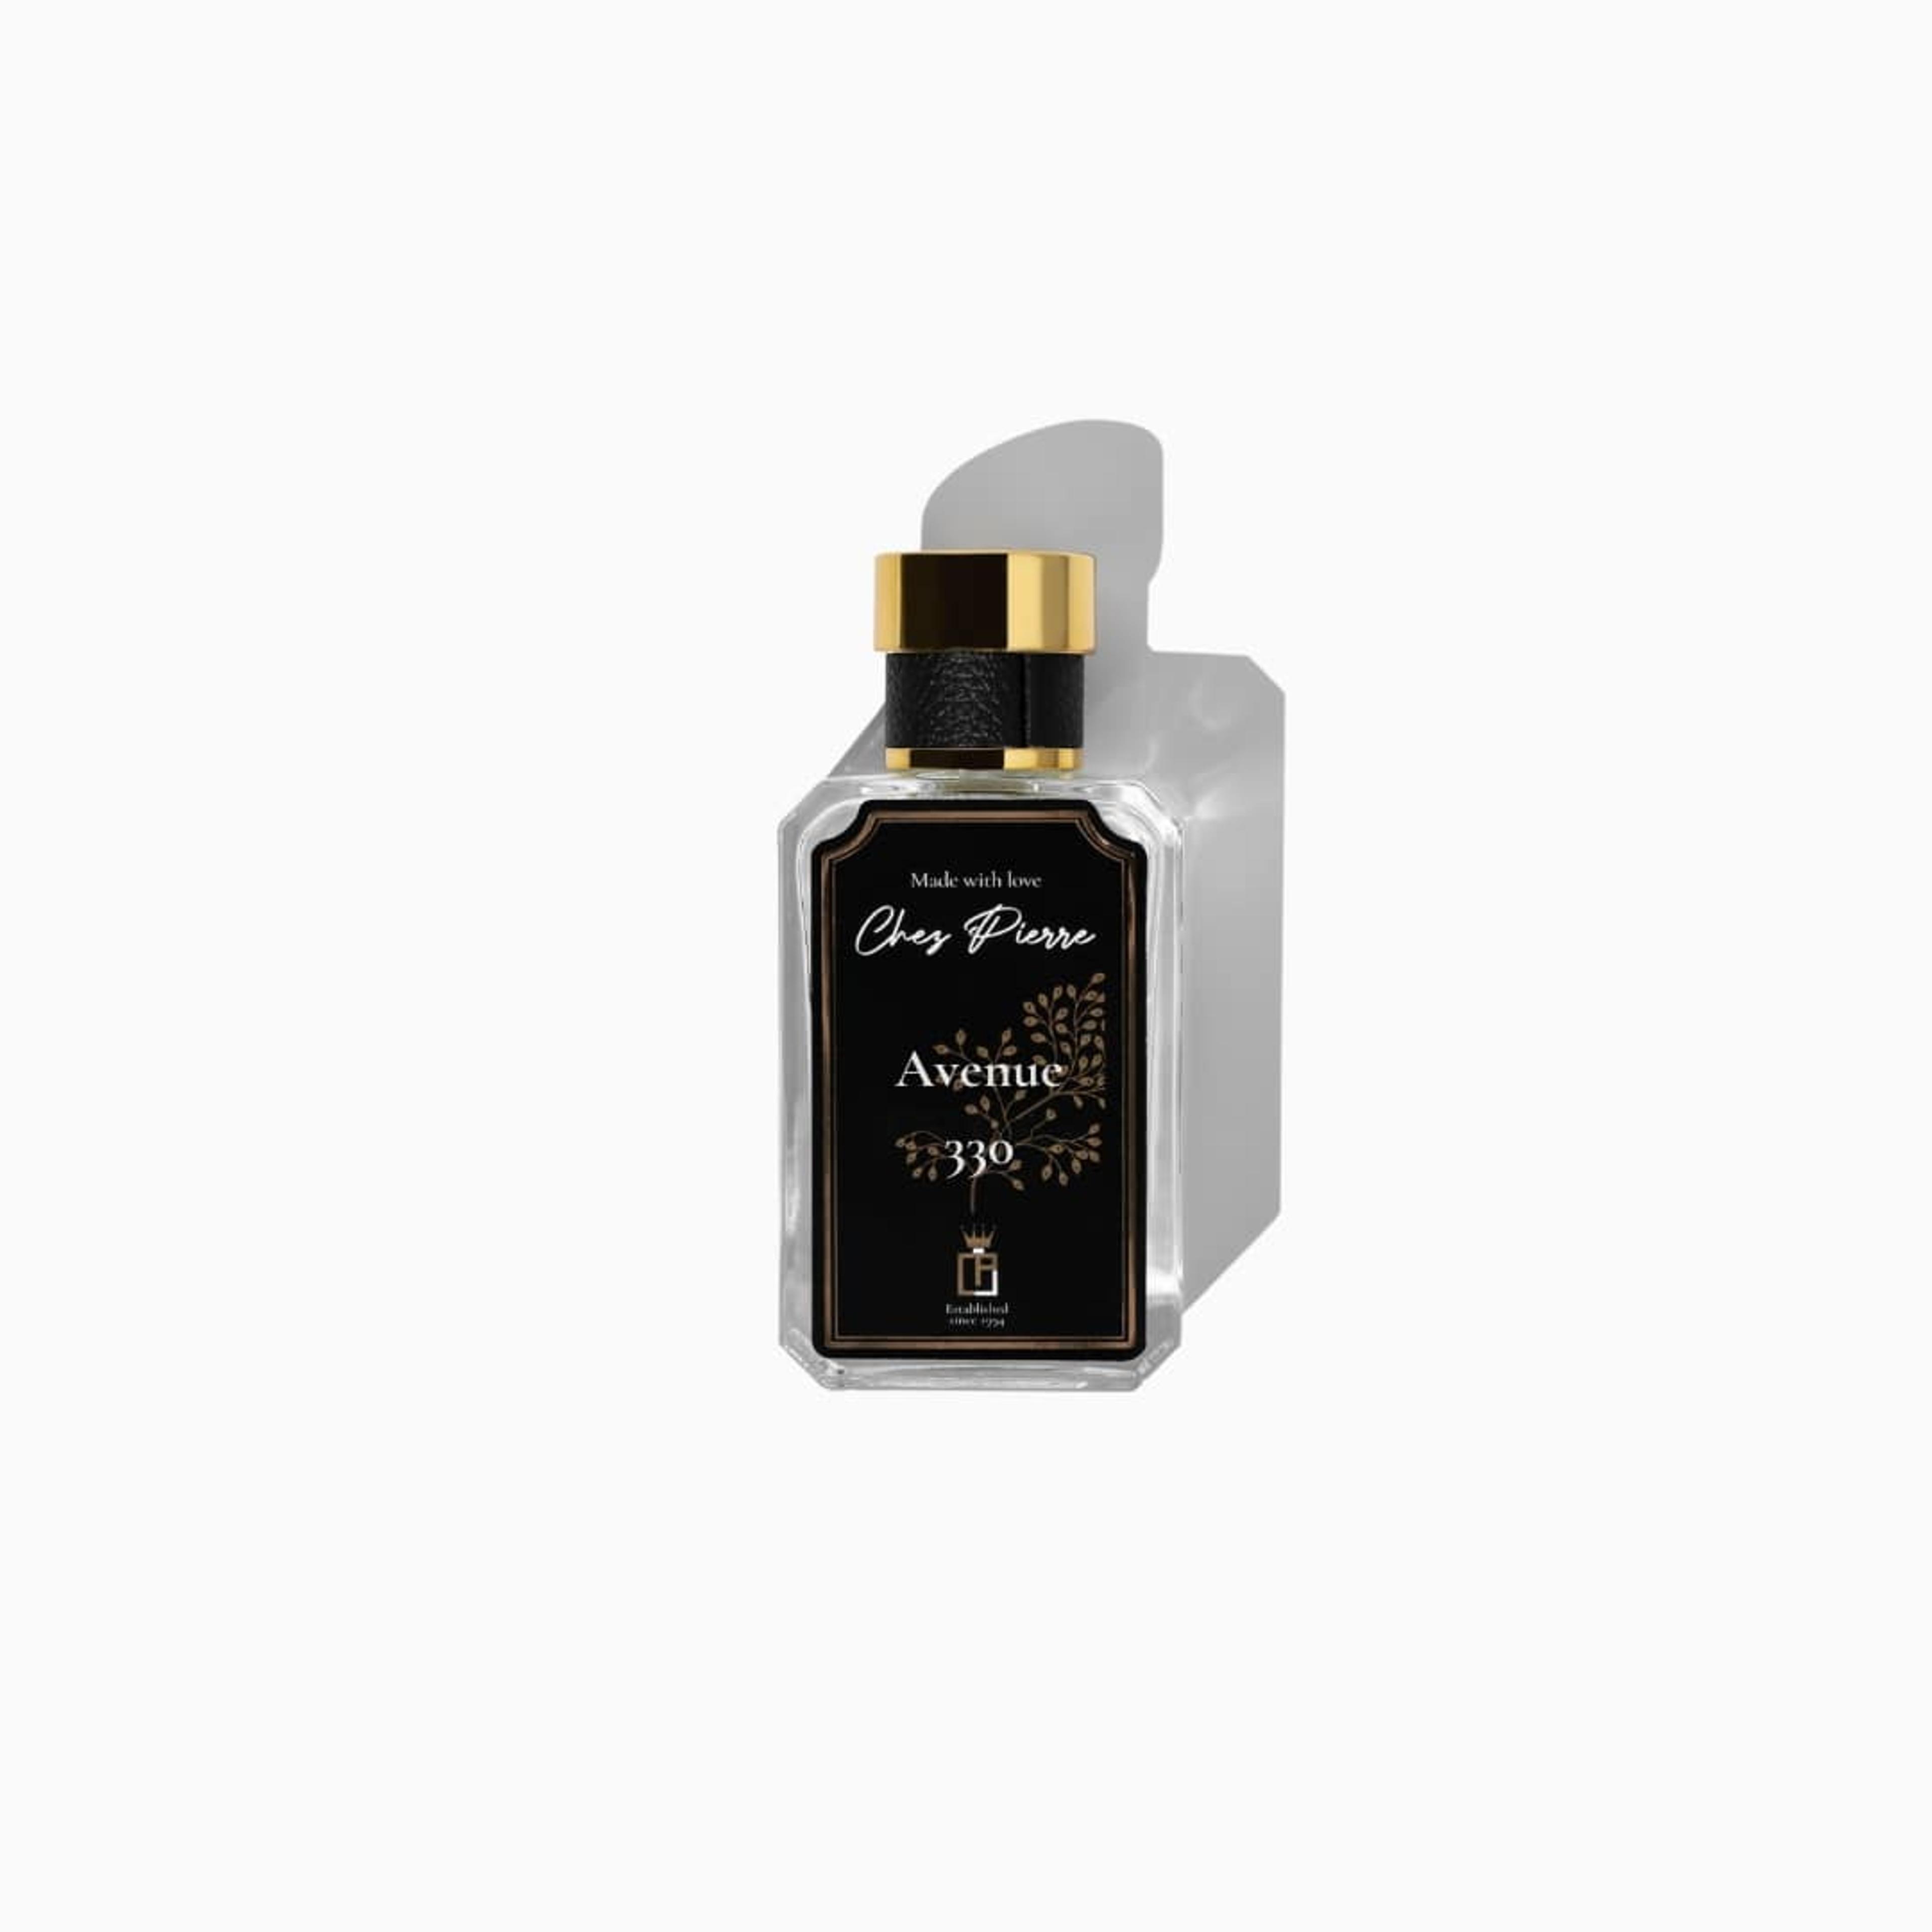 Chez Pierre's Avenue 330 Perfume Inspired By Santal 33